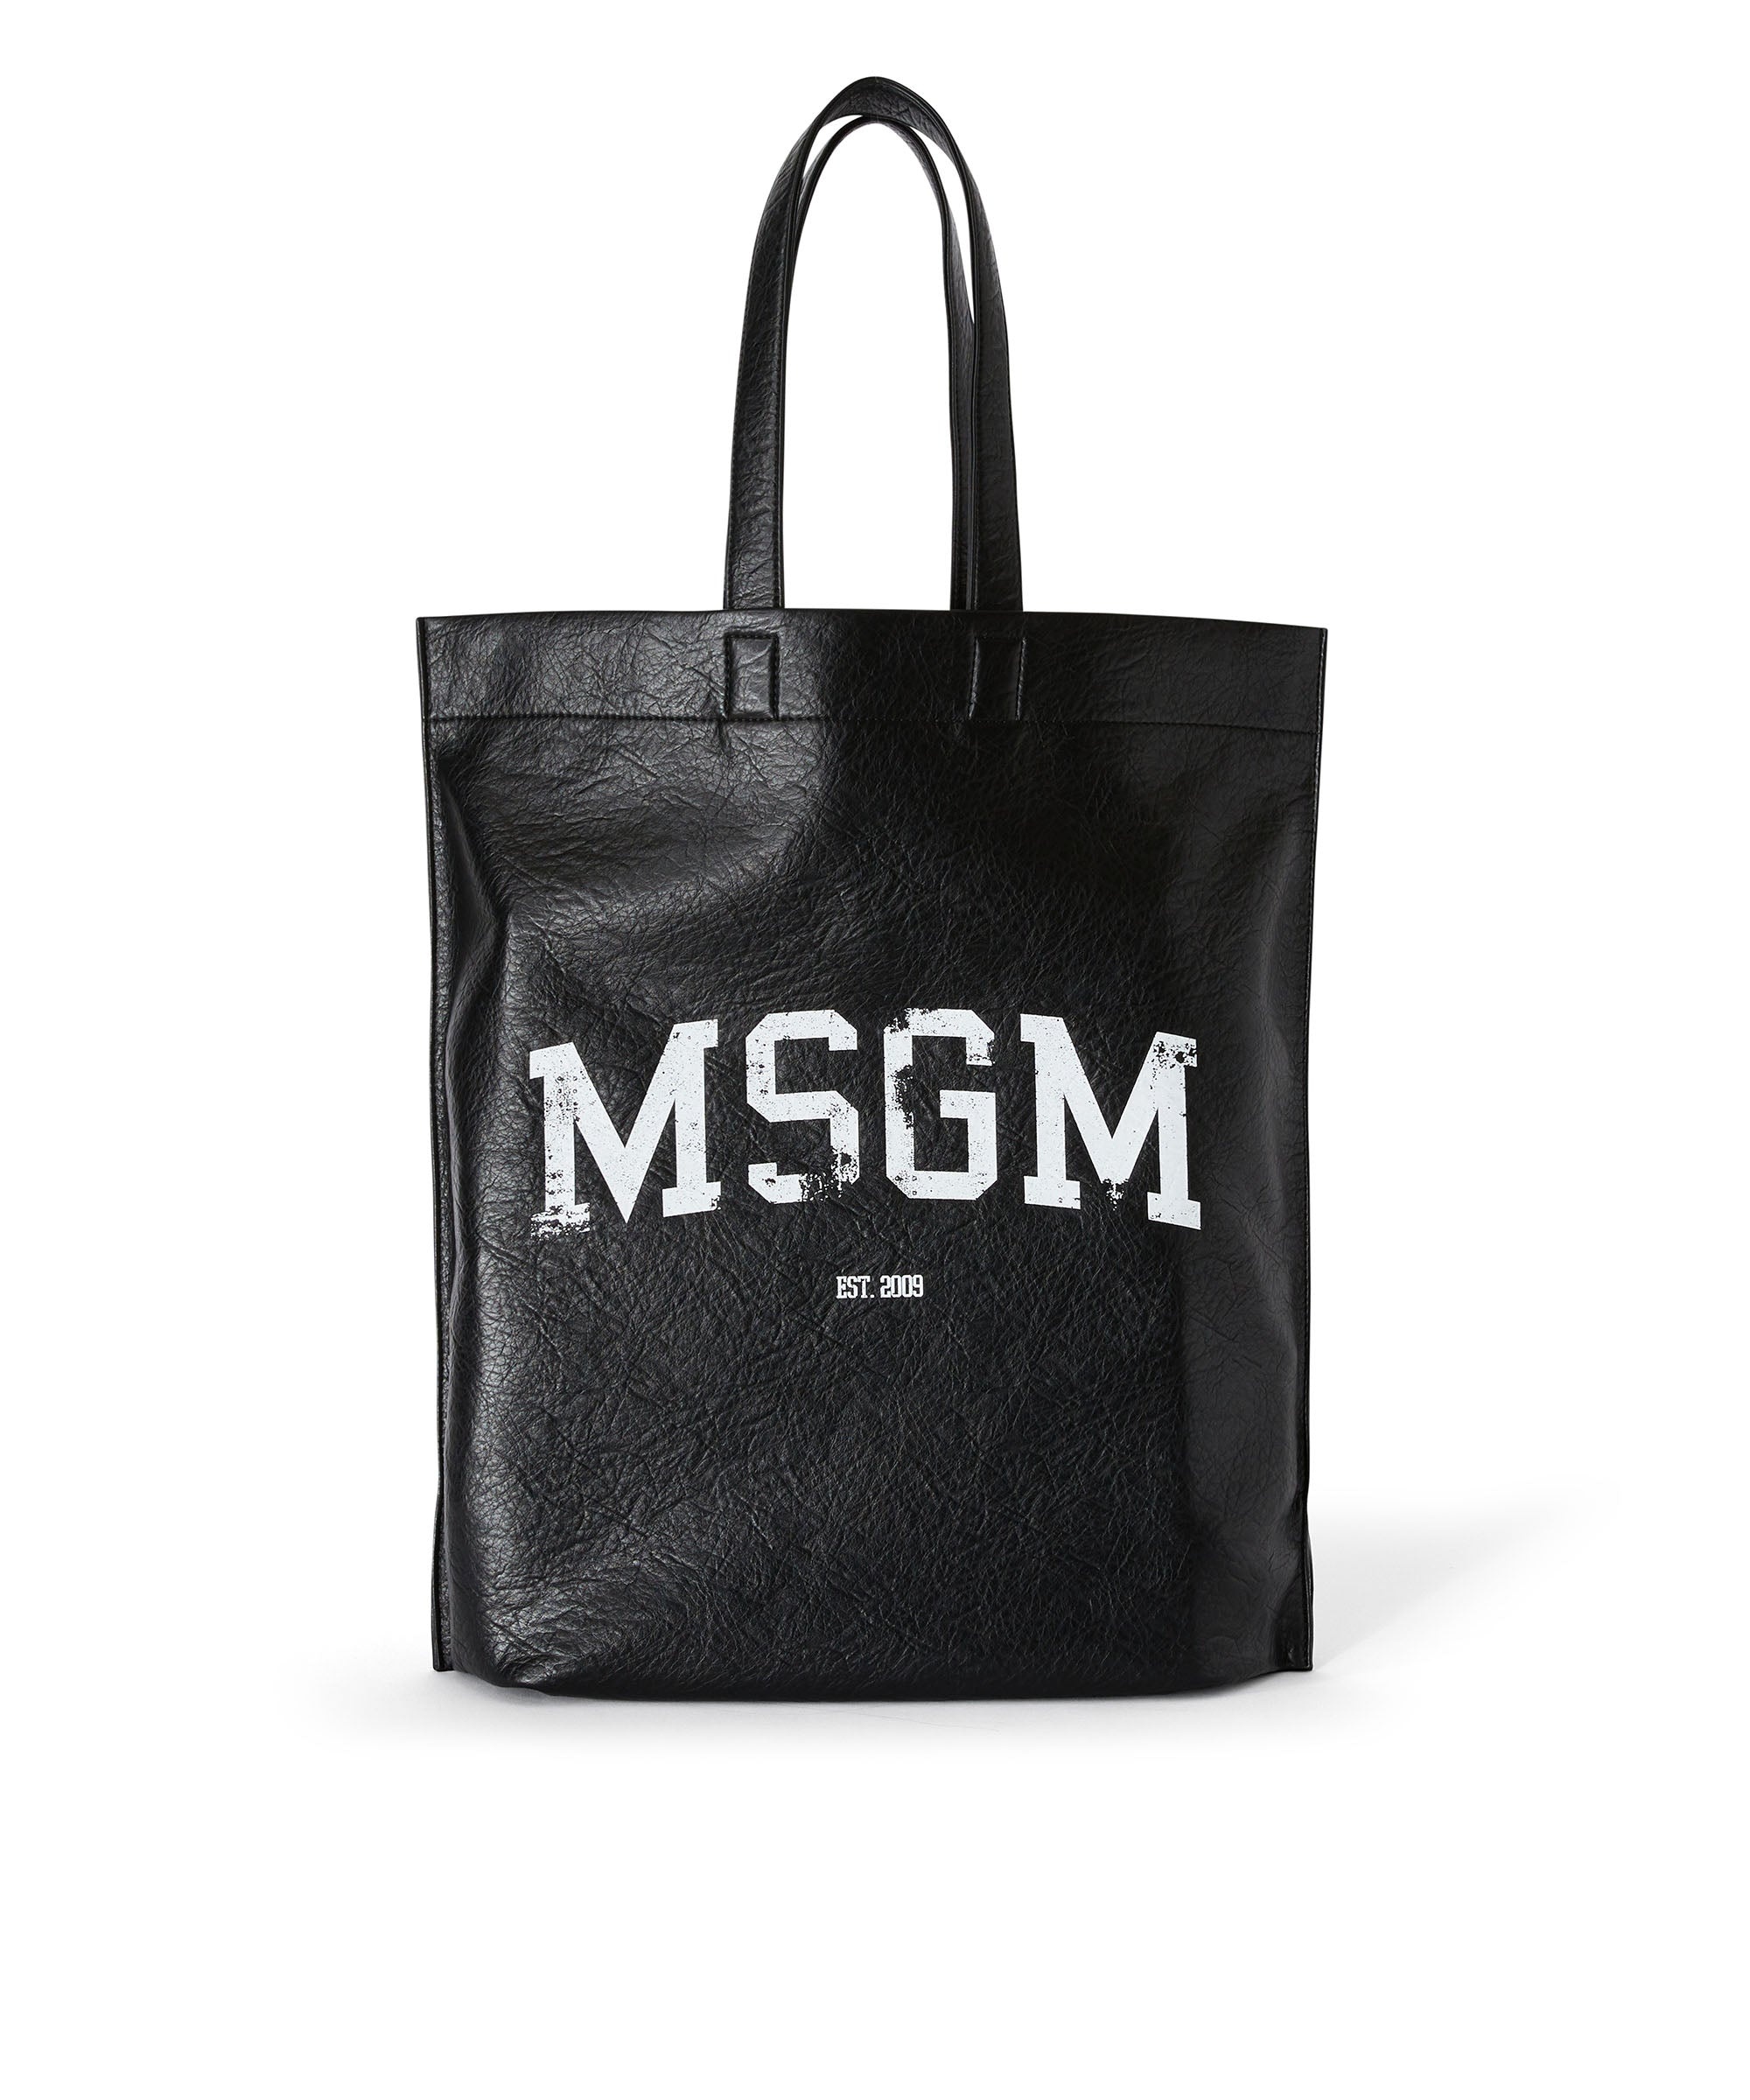 Maxi tote with distressed effect college logo - 1